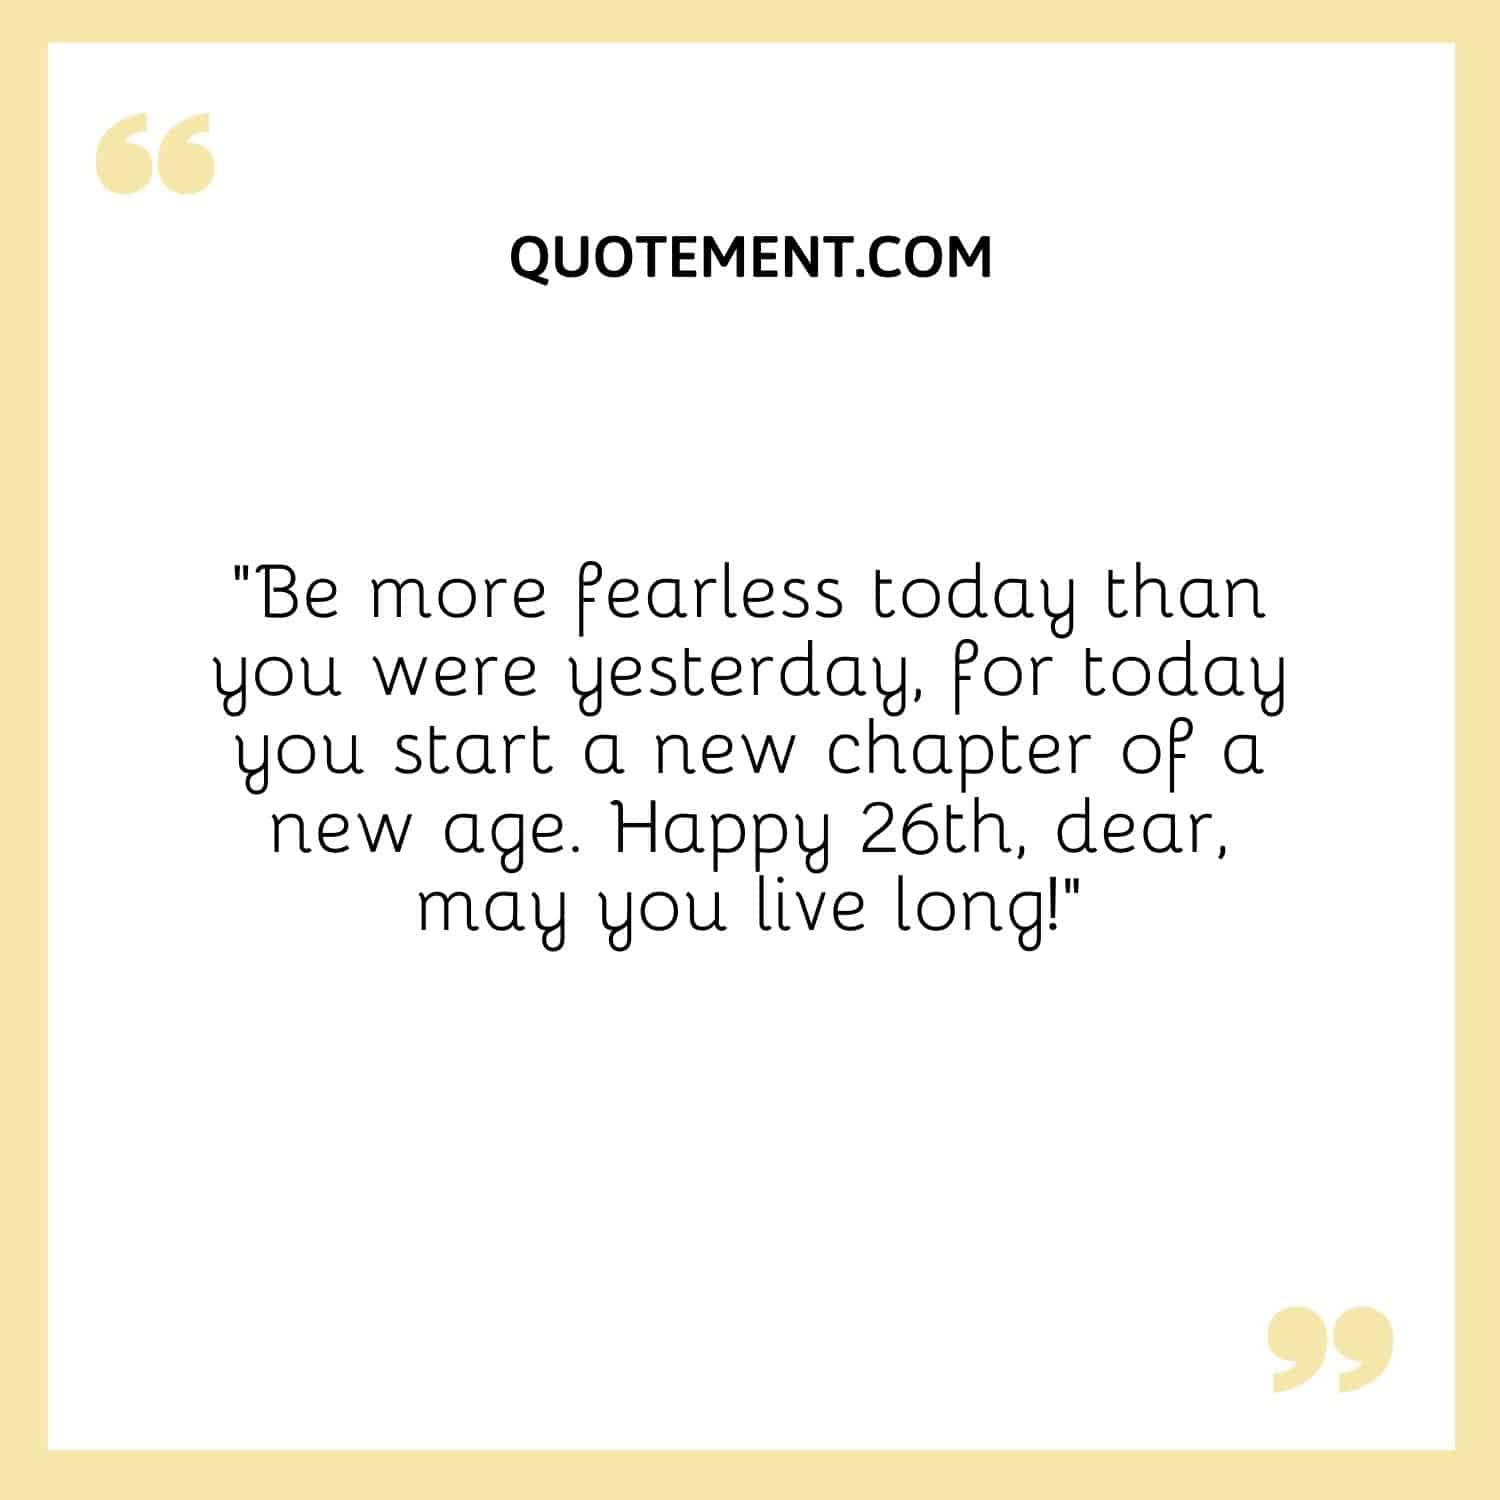 Be more fearless today than you were yesterday, for today you start a new chapter of a new age.